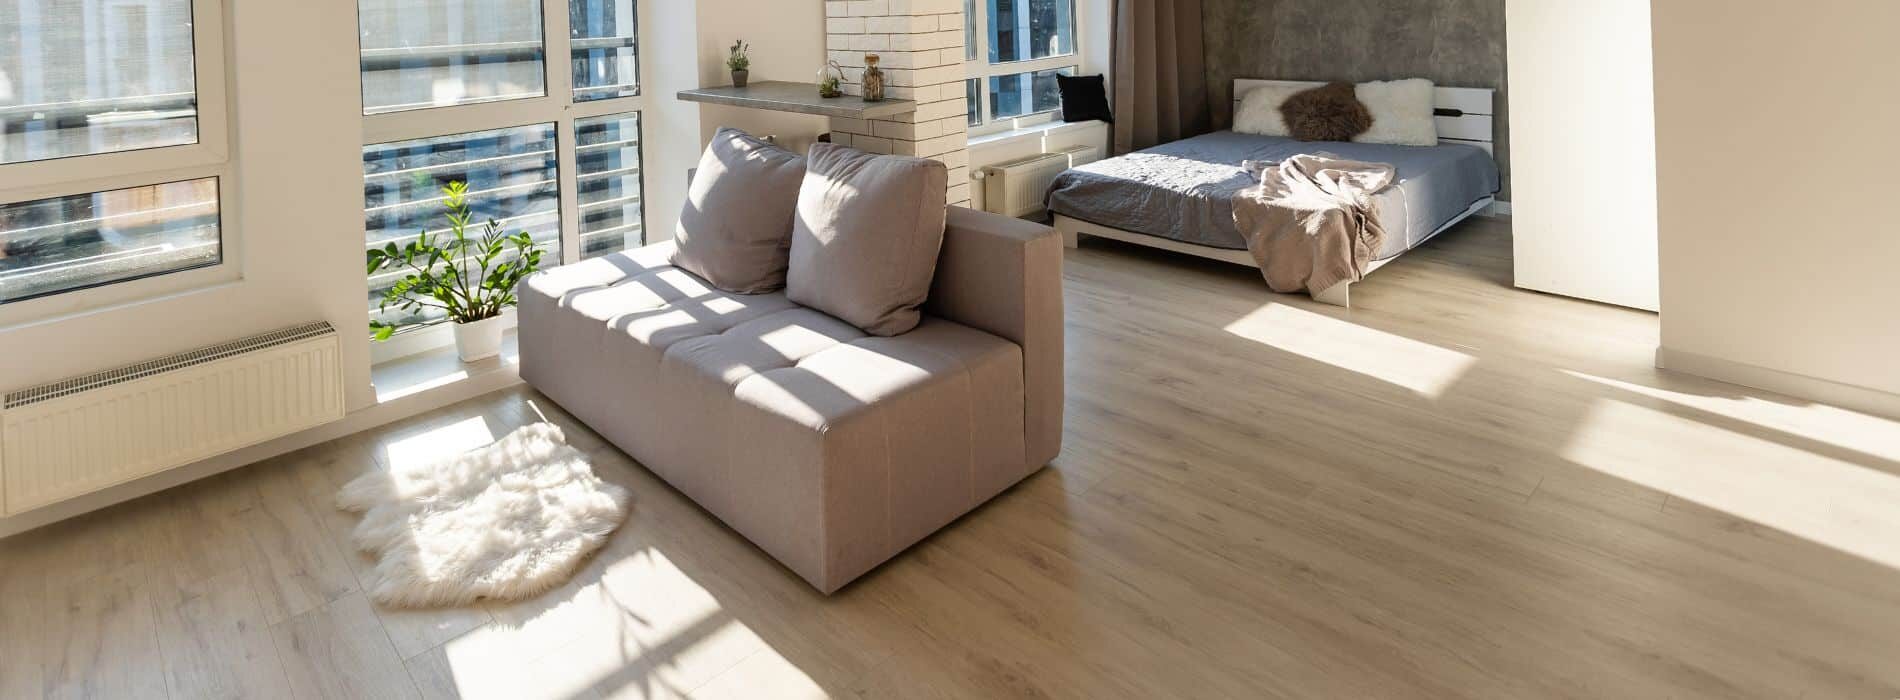 Mr Sander® have masterfully refinished a living room wooden floor, creating a stunning space filled with furniture and natural light from the windows.